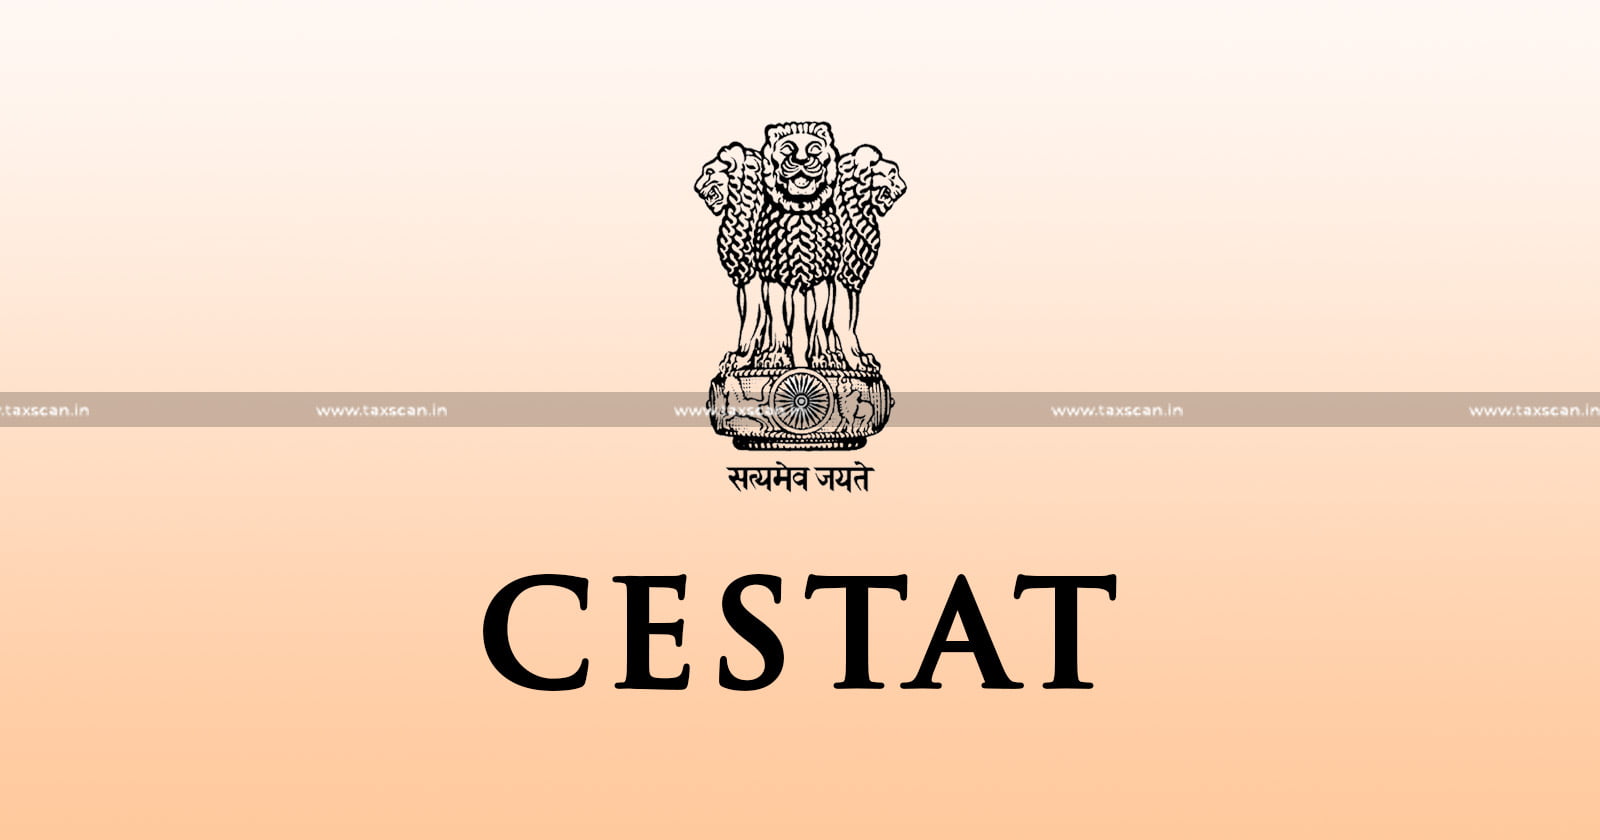 Central Excise Authorities - clearance - Provisional Assessment - CESTAT - Central Excise Authorities cannot Deem the clearance - taxscan